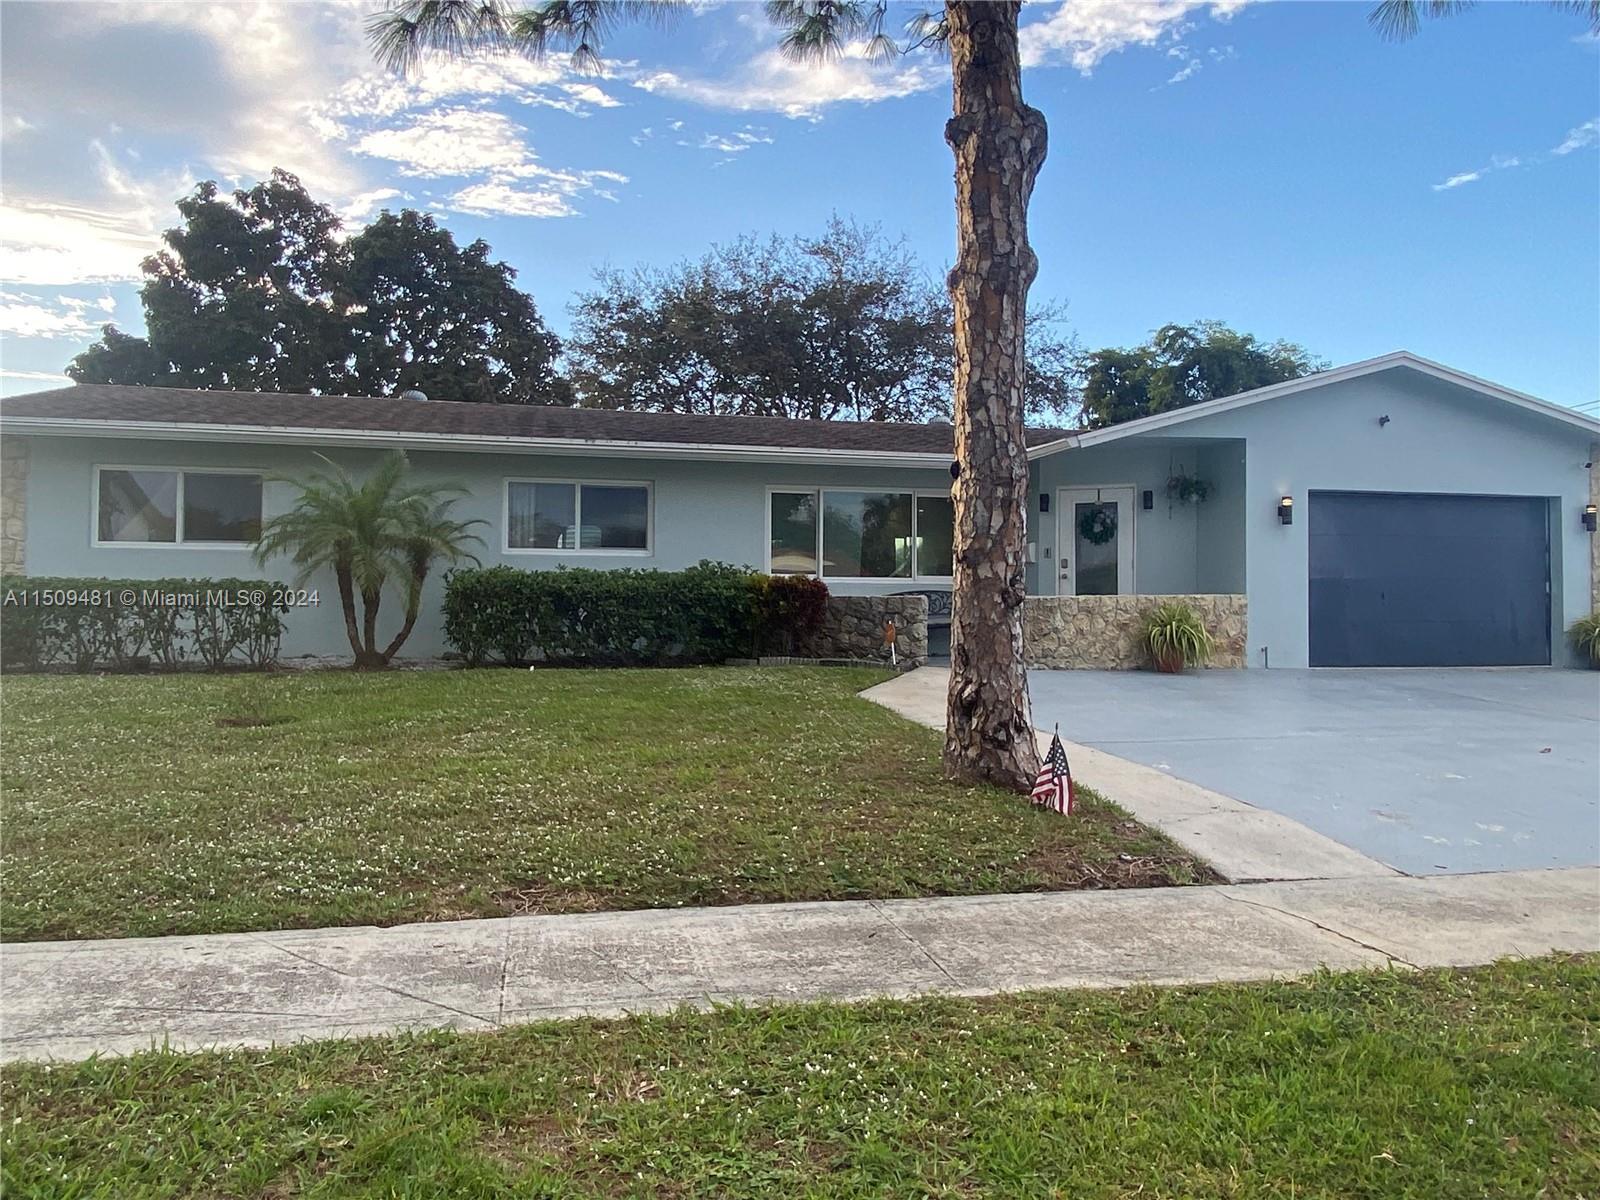 Photo of 551 NW 42nd Ave in Coconut Creek, FL